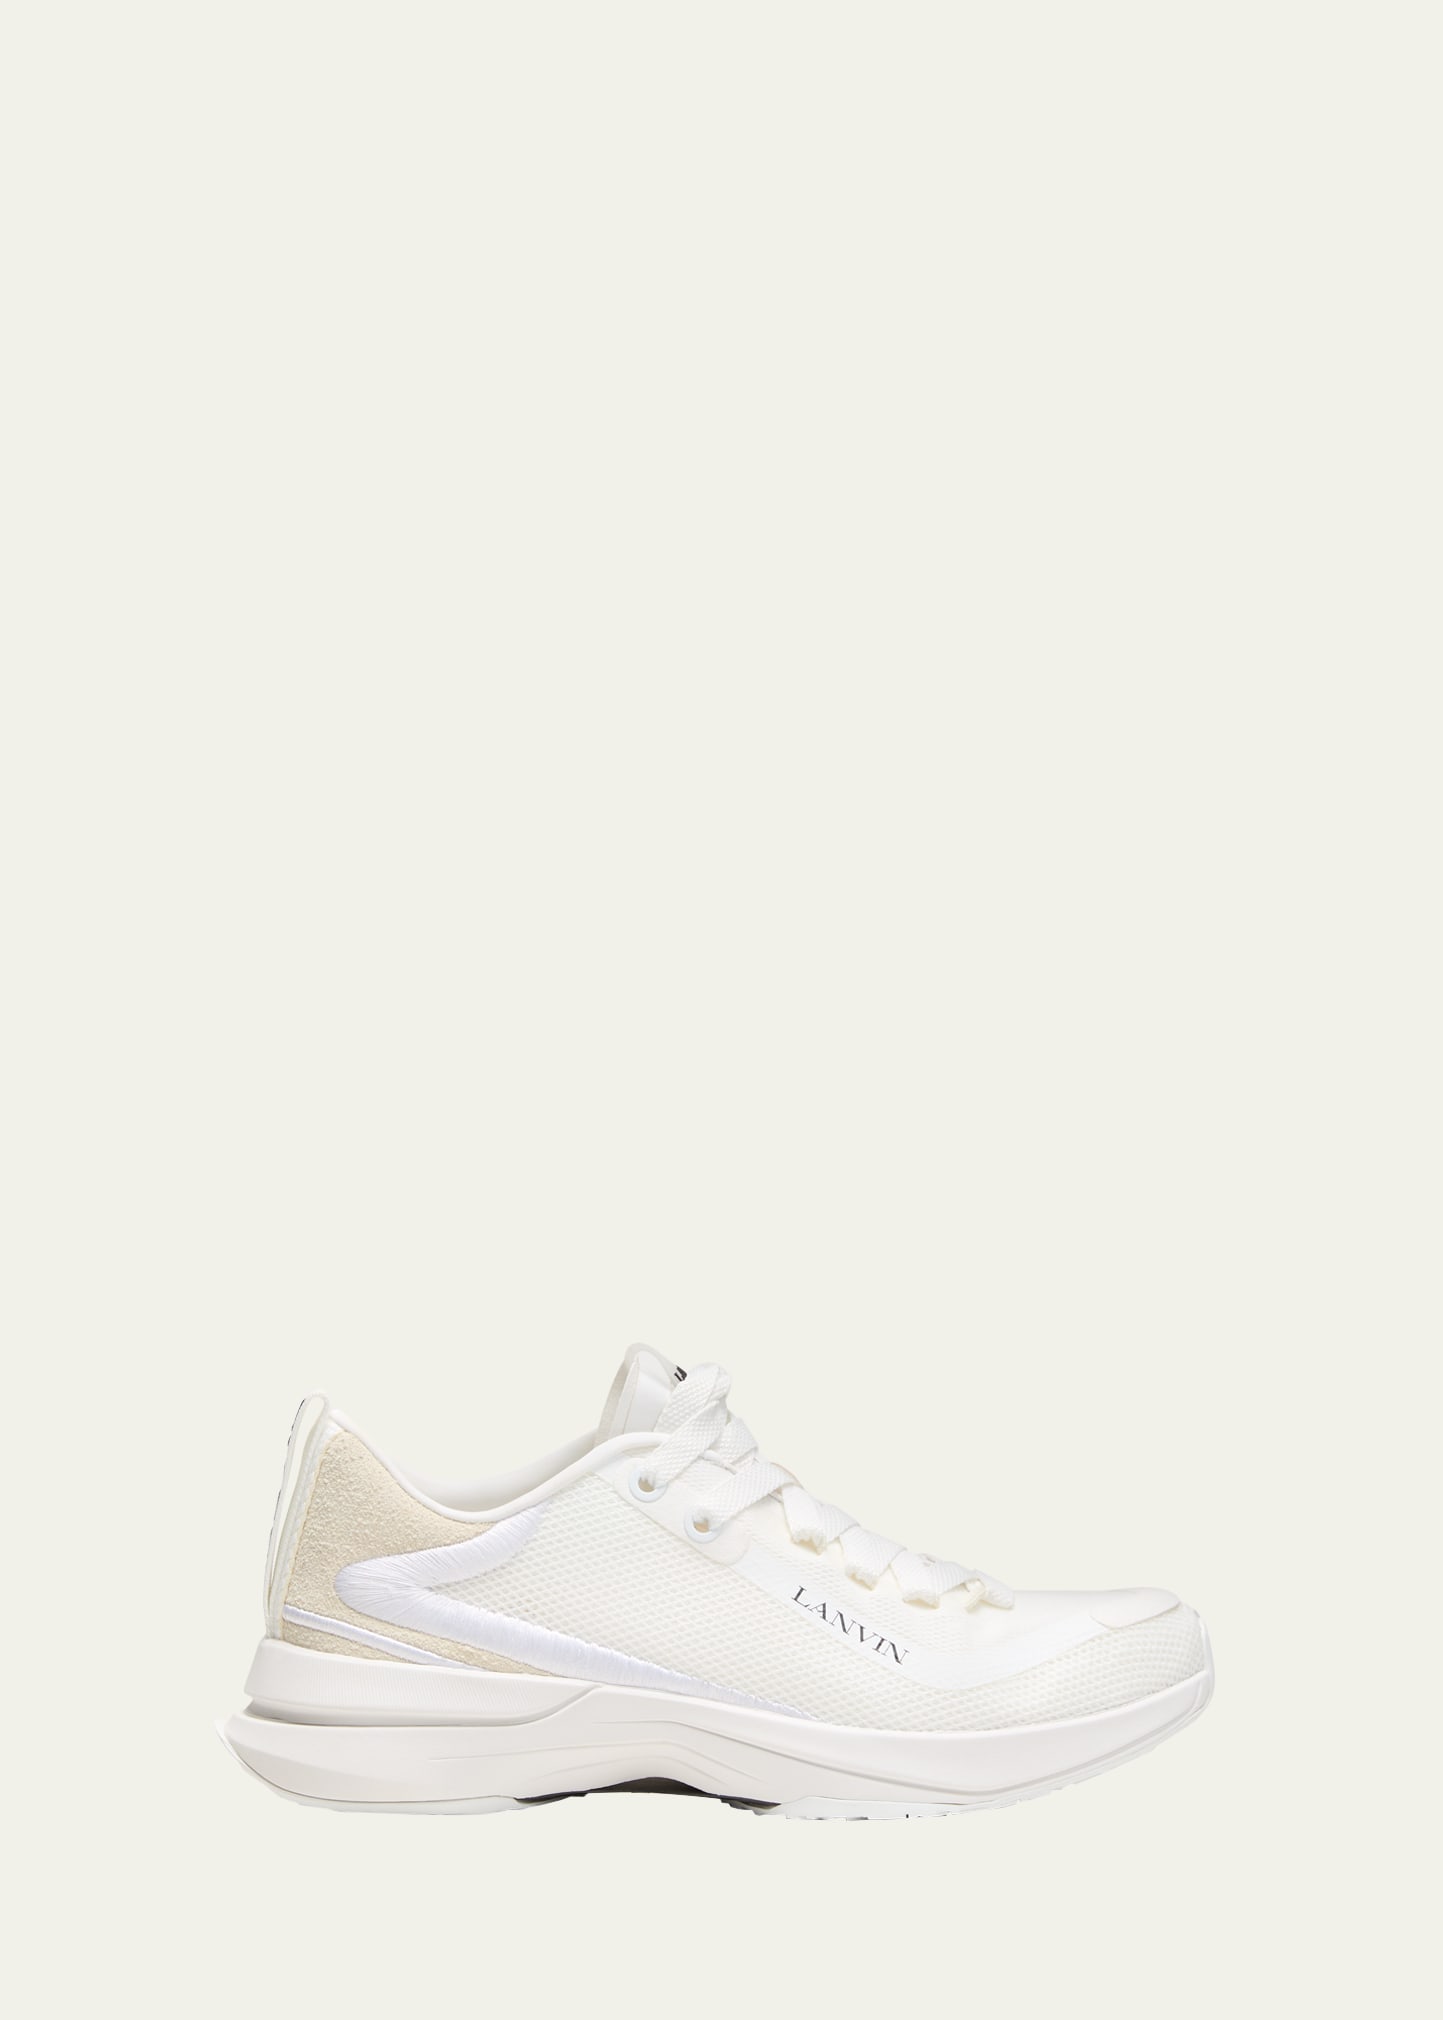 Lanvin Men's Mesh And Suede Runner Sneakers In White